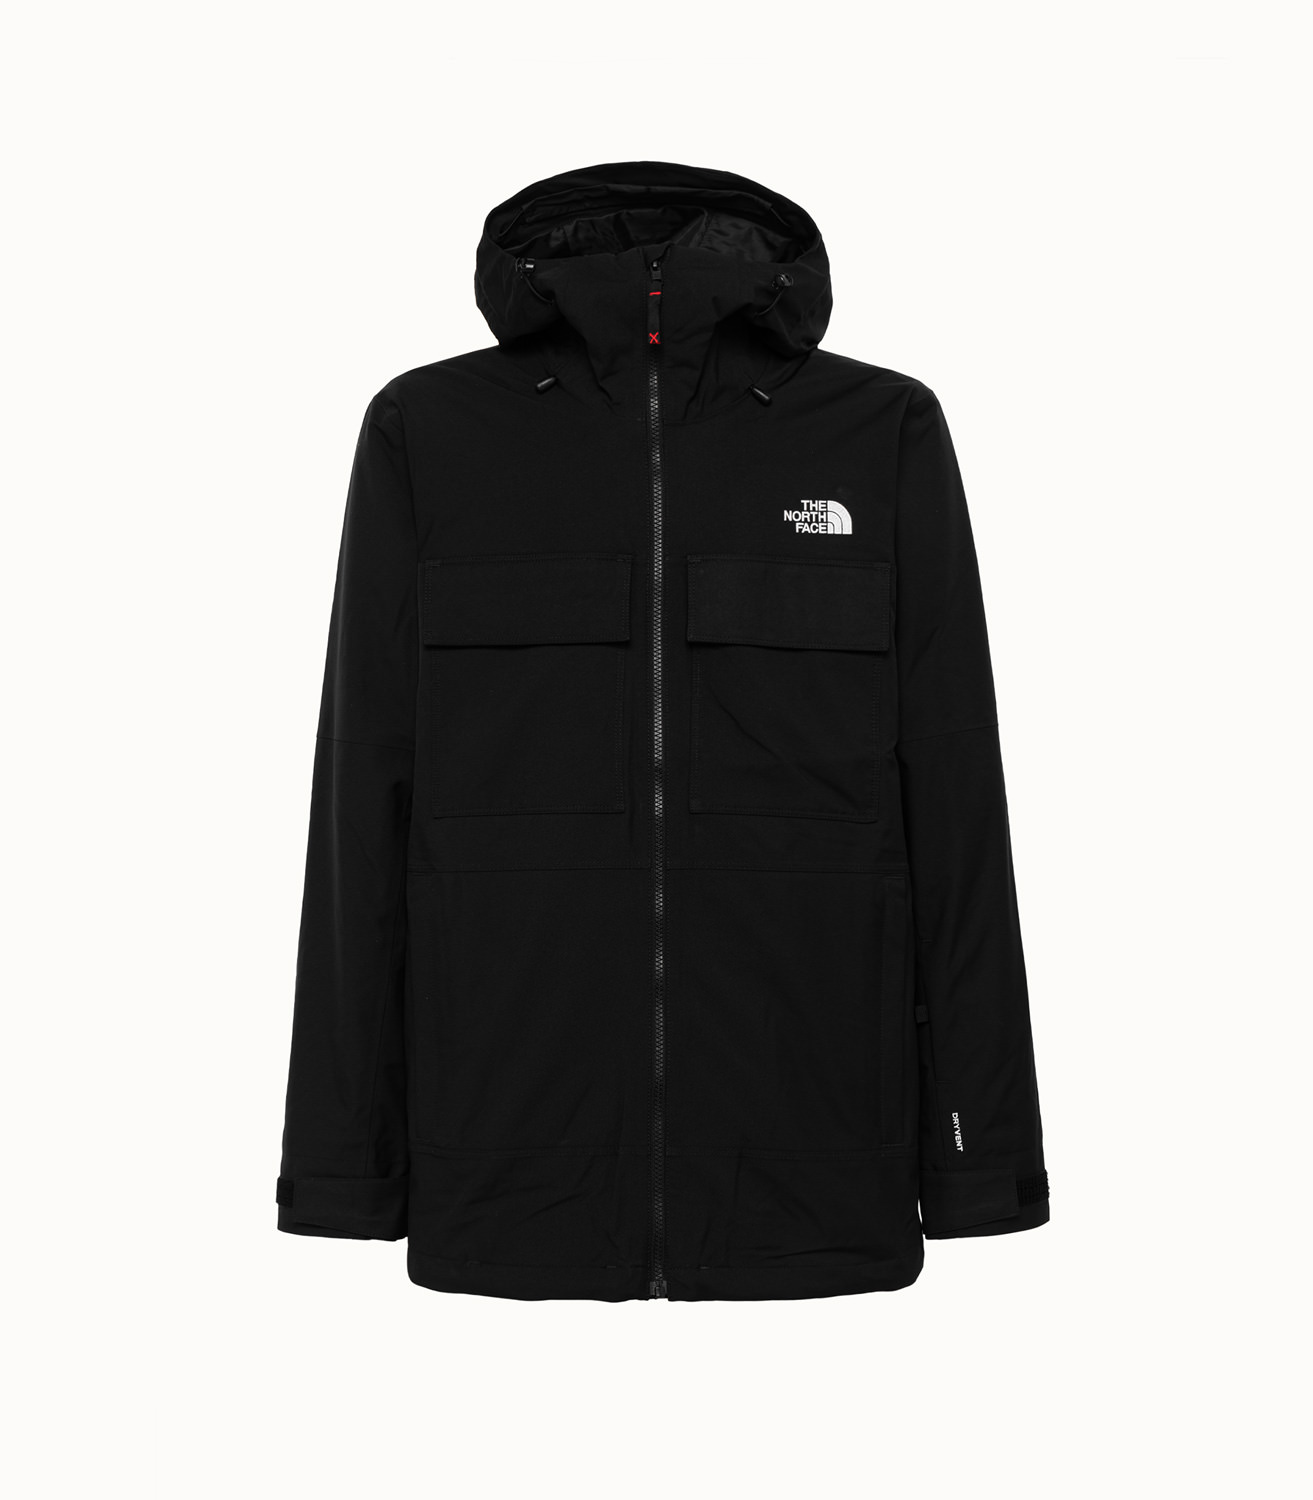 THE NORTH FACE FOURBARREL TRICLIMATE JACKET | Playground